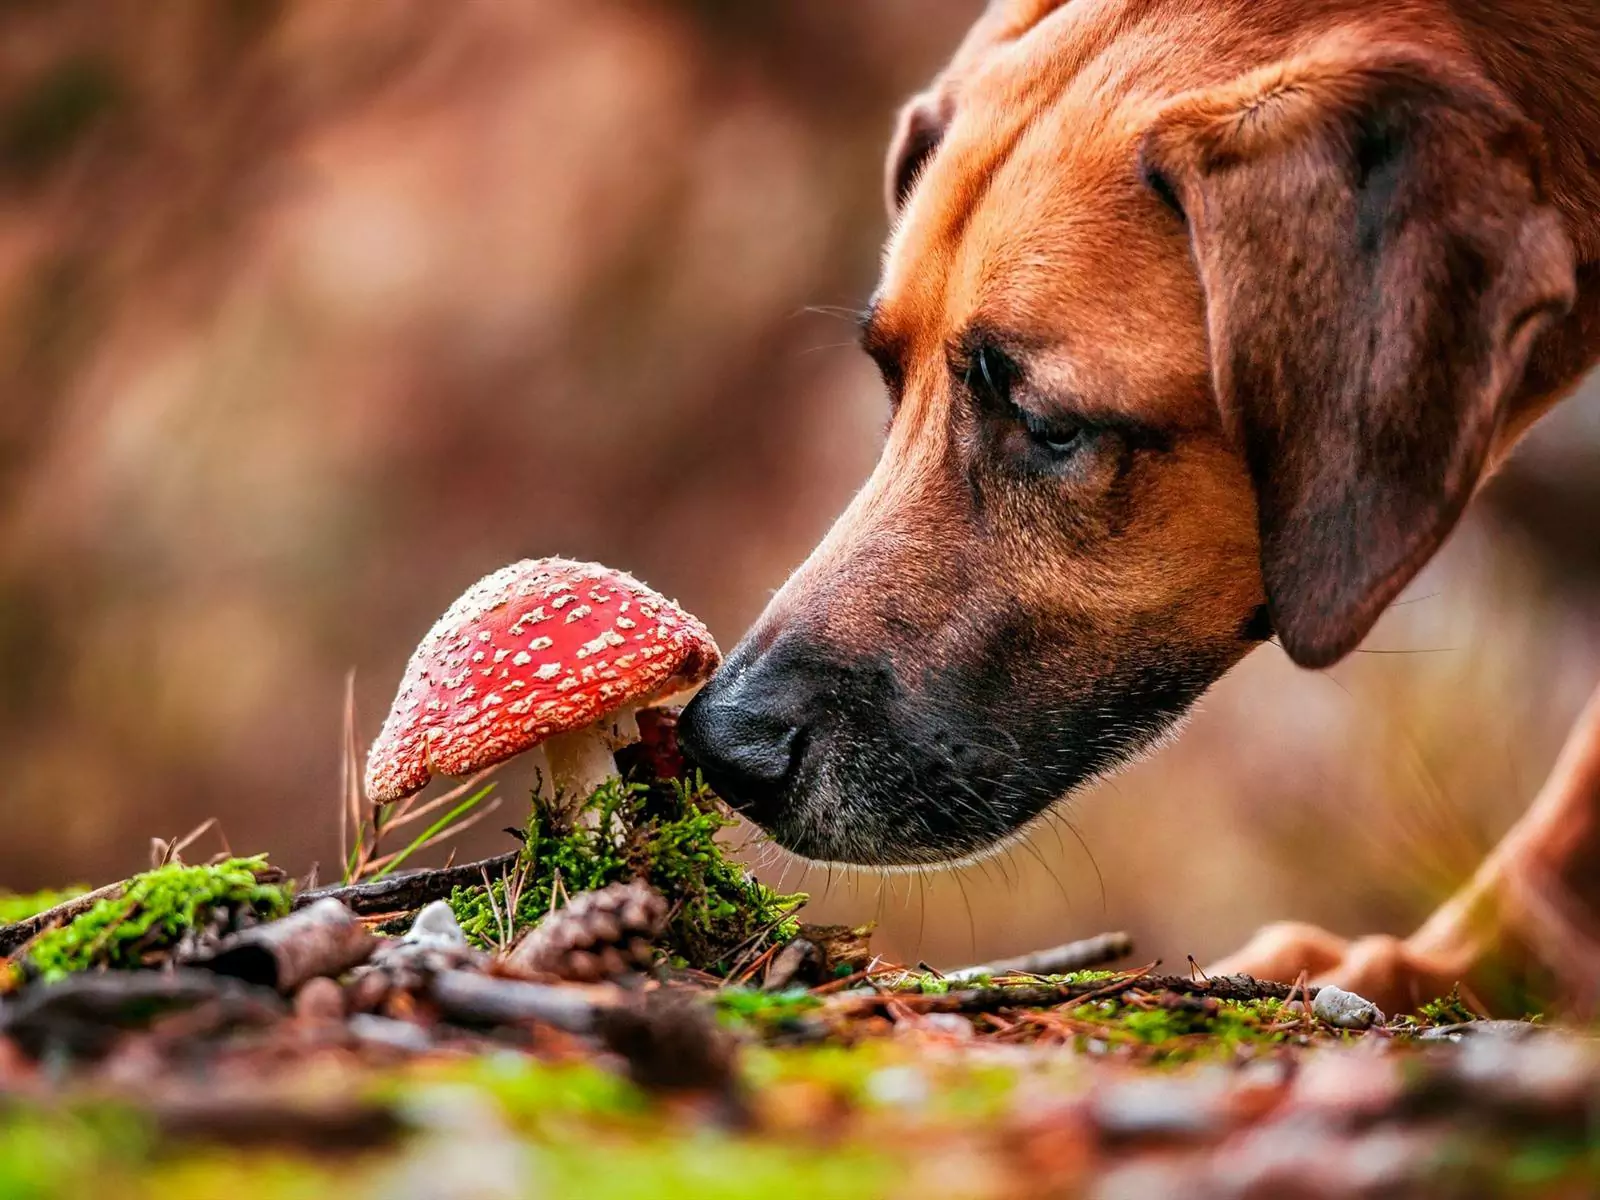 Can dogs eat mushrooms? What is the nutrition of giving mushrooms to dogs